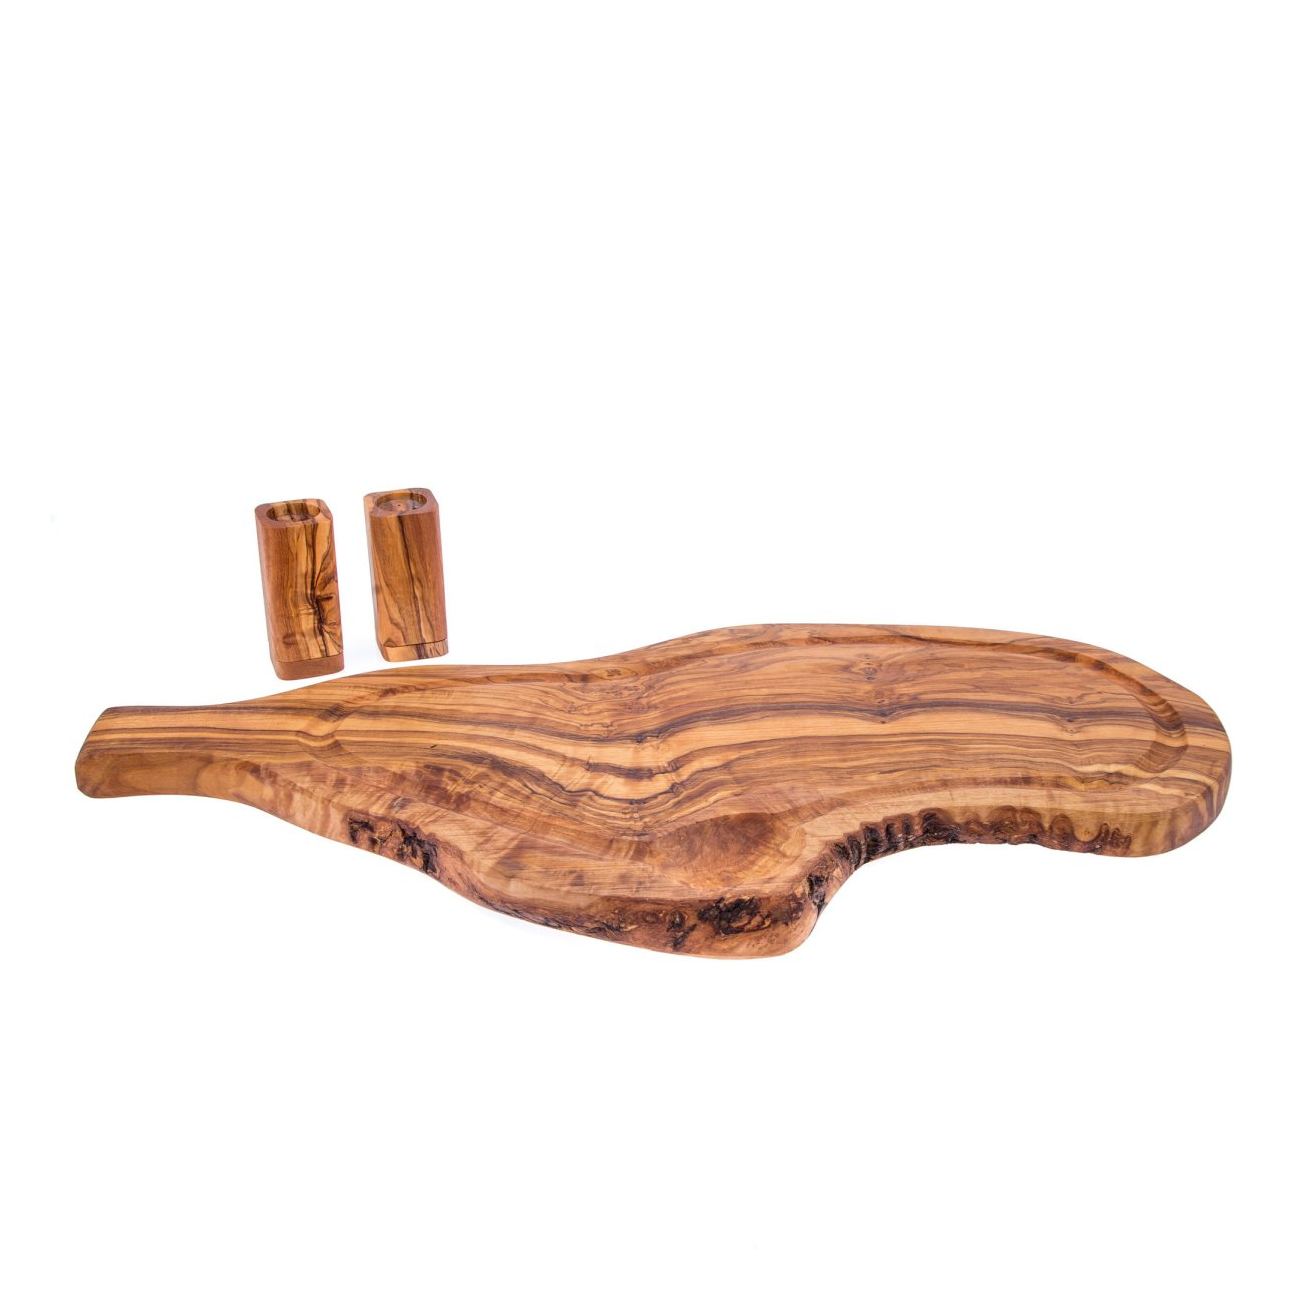 https://www.elitecrafters.com/image/cache/data/uploads/201611m/B6_E8_E9/Set_of_Olive_Wood_Salt_and_Pepper_Shakers_n_Olive_Wood_Serving_or_Cutting_Board_with_Handle,_Rustic_Style_Chopping_Board_19.6_(50cm)1-1300x1300.jpg